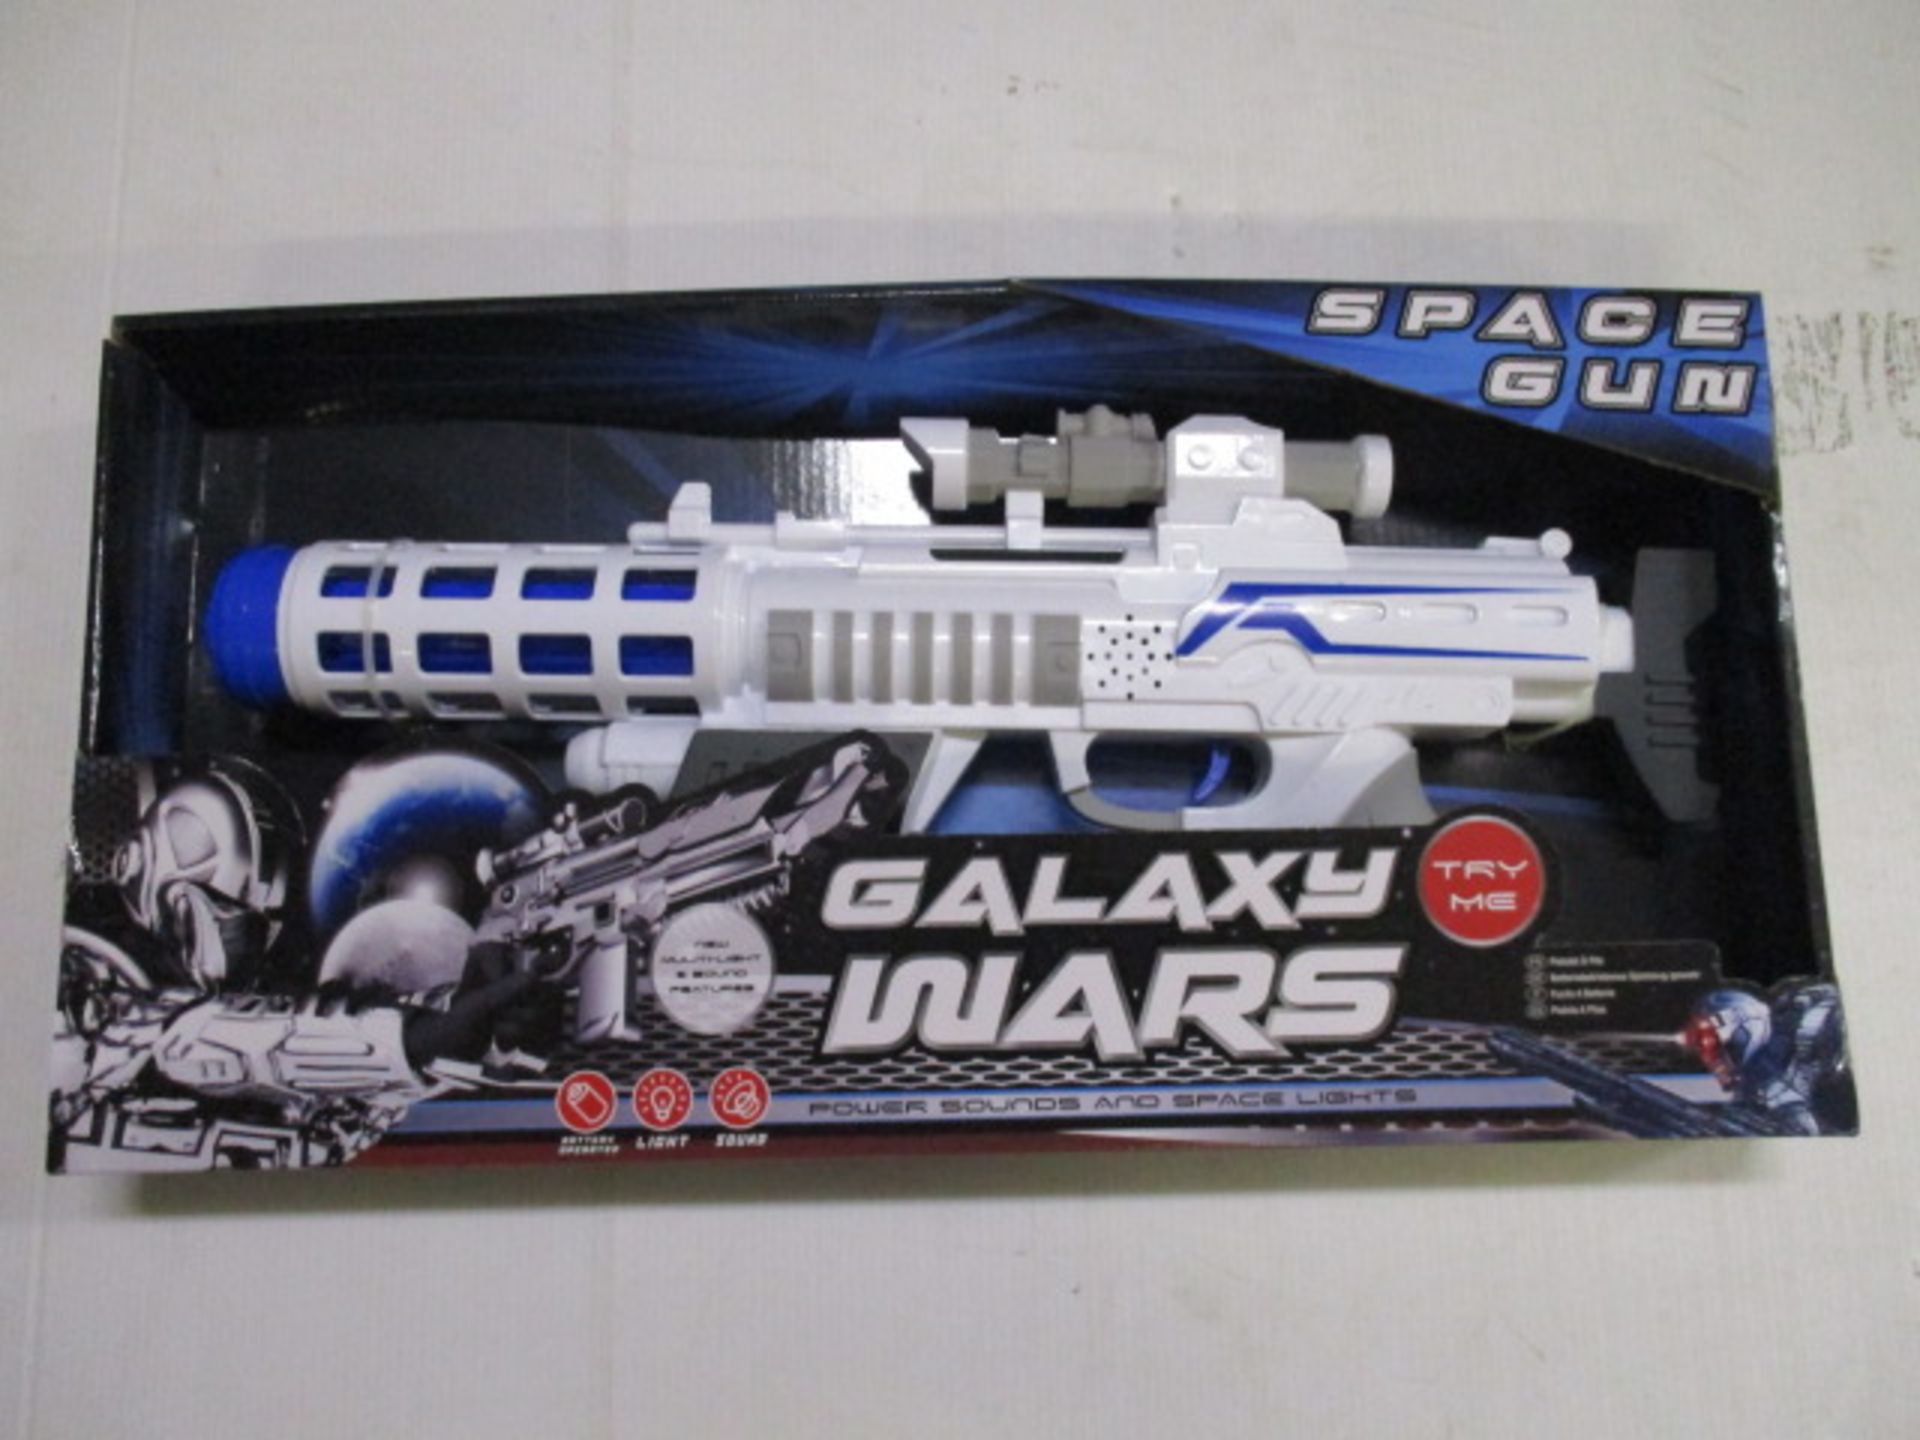 New and sealed Galaxy war space gun with sounds and lights